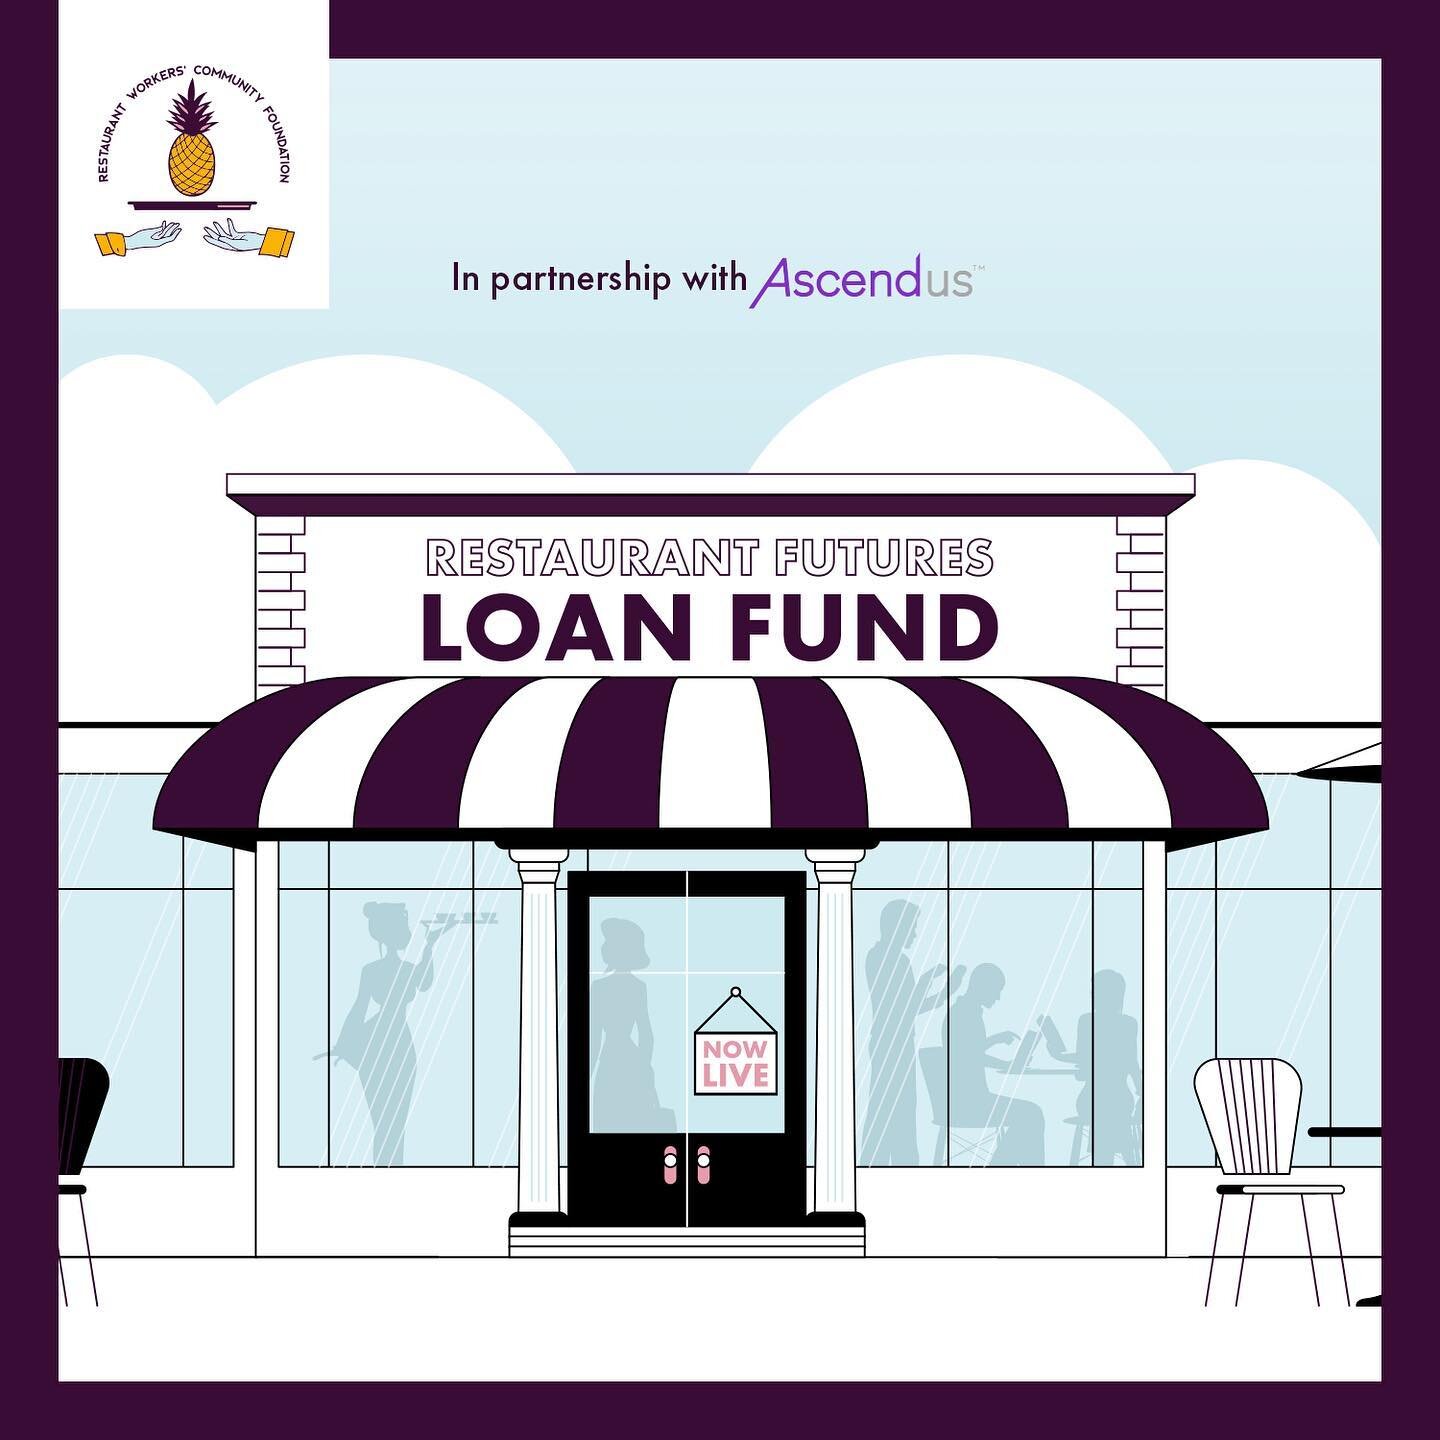 @rwcfusa and @myascendus just launched a $1.2 million, zero-interest loan program for restaurants committed to improving conditions for workers.  Get details and links to apply @rwcfusa.